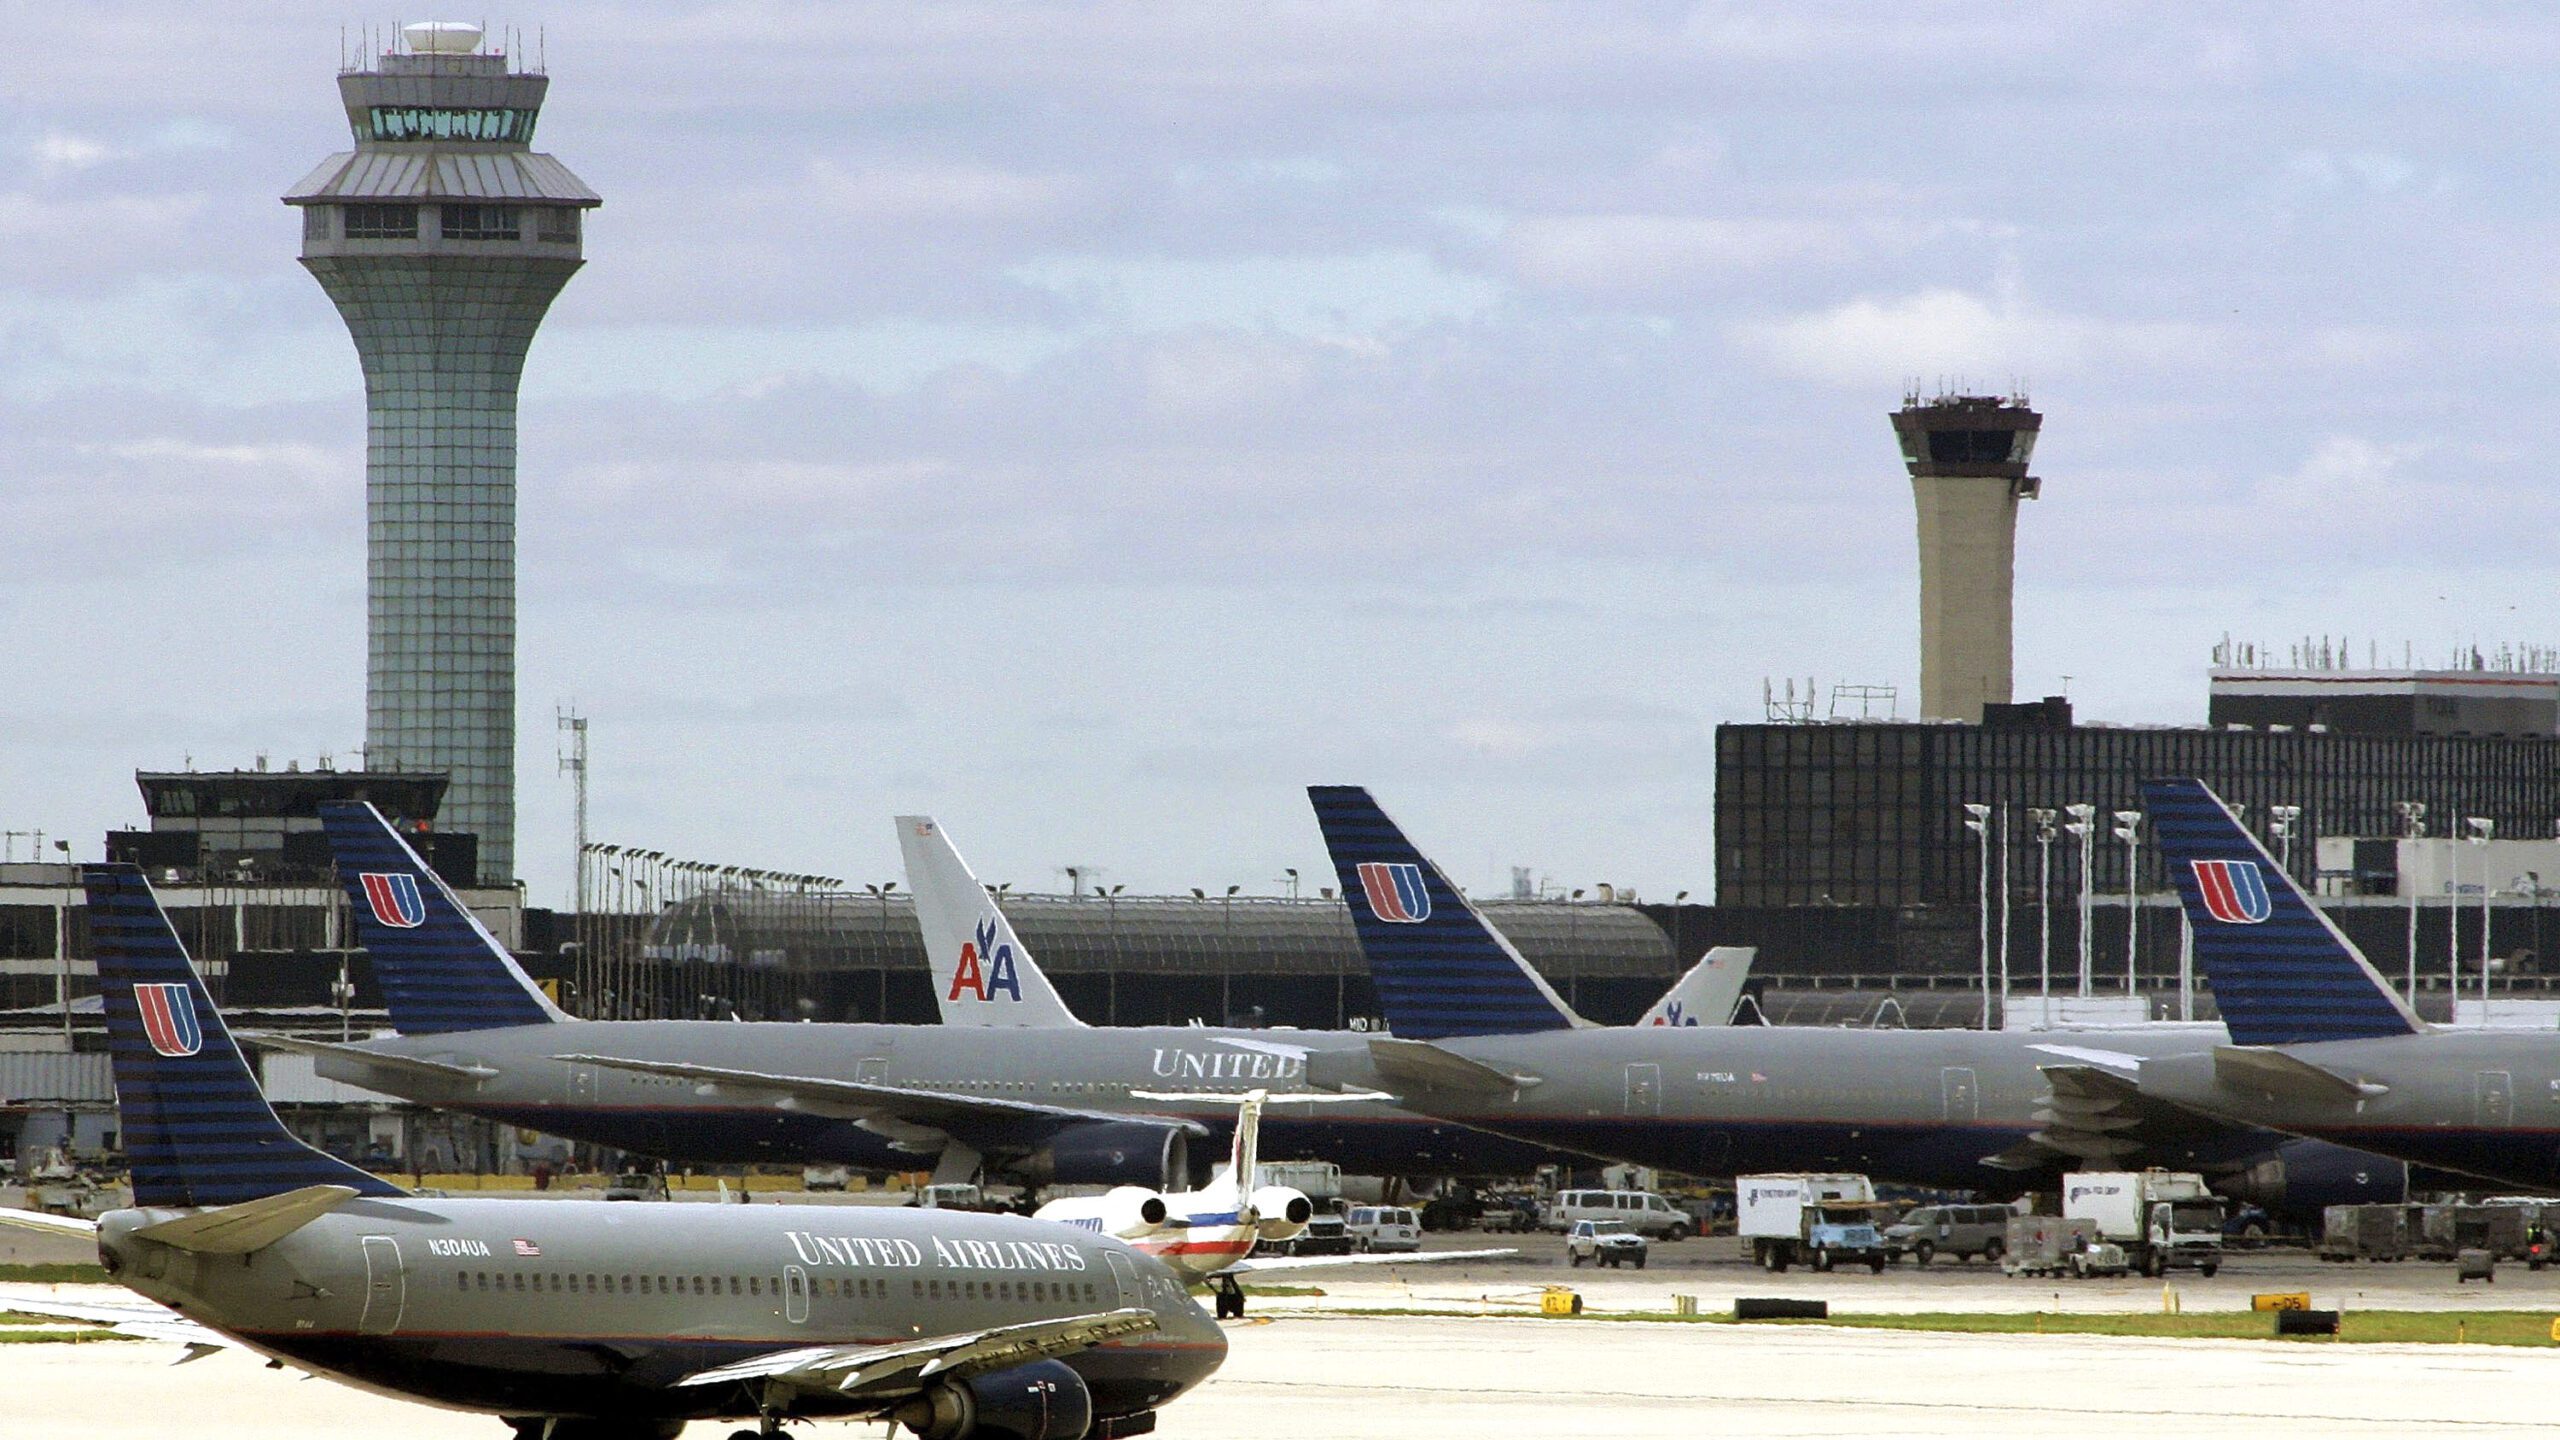 police-arrest-man-claiming-to-have-bomb-at-o’hare-international-airport